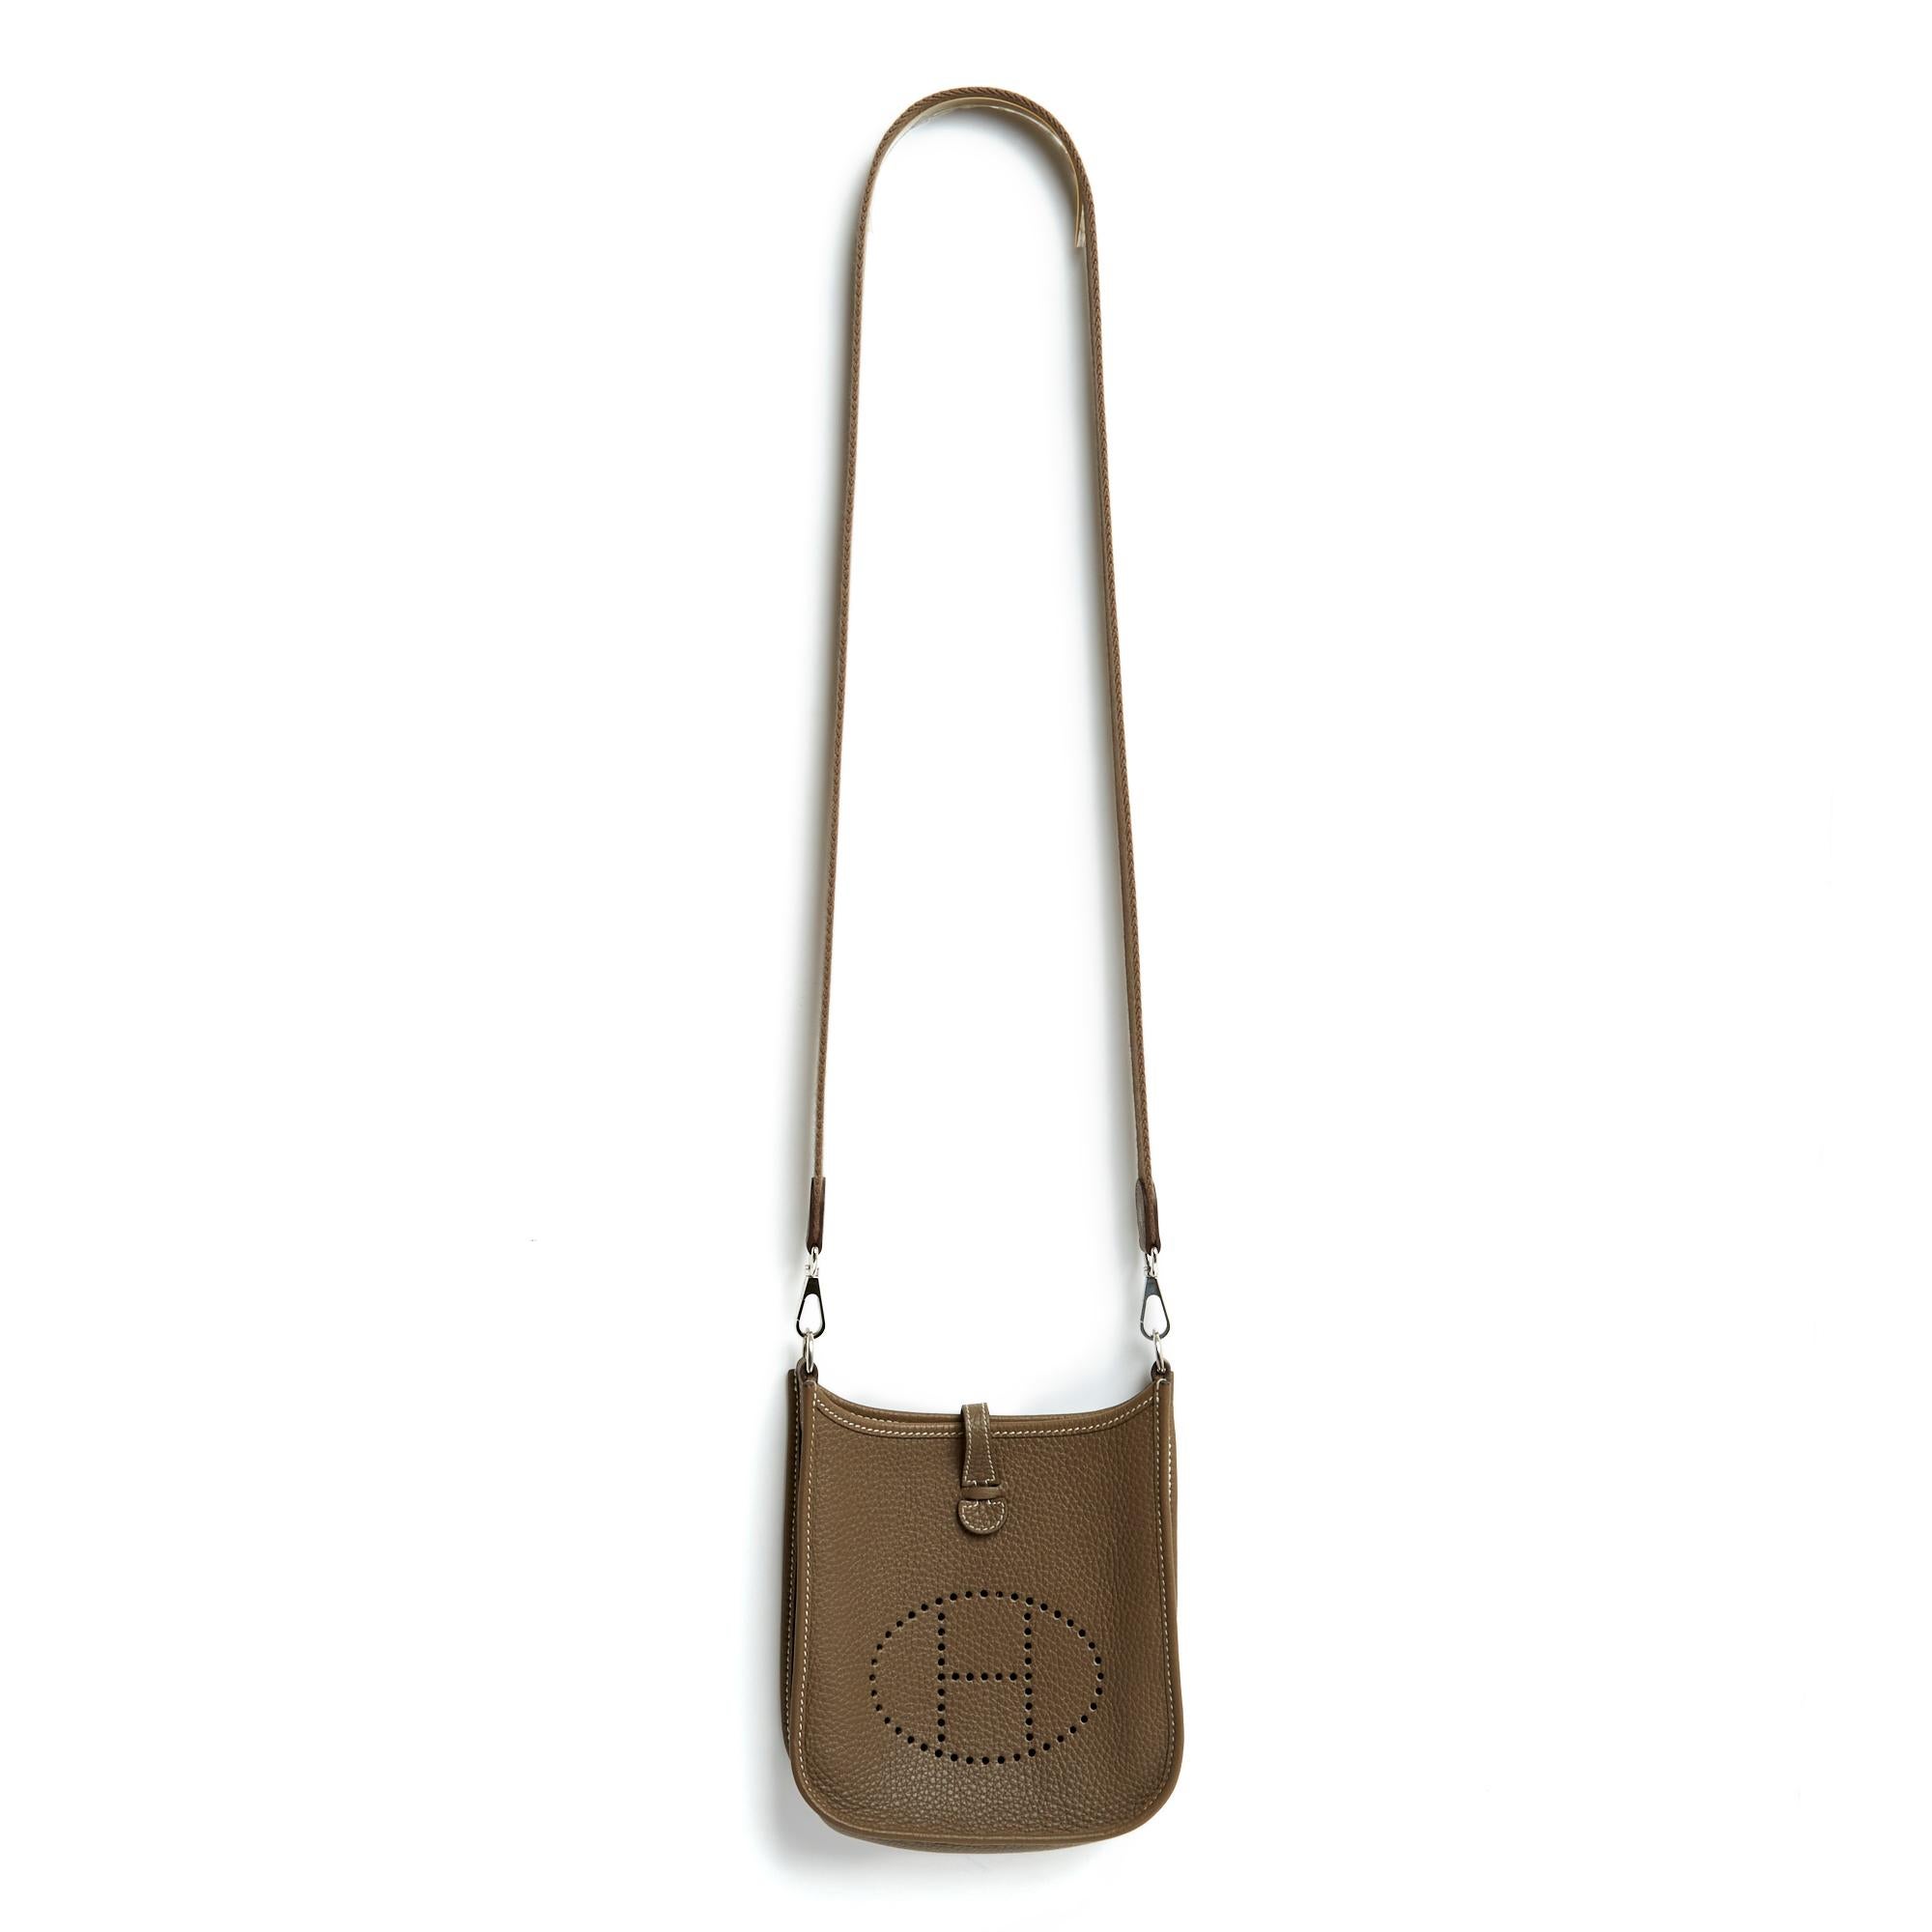 Hermès bag, Evelyne model, size 16 or TPM, in taupe or Etoupe Clémence leather from Hermès, shoulder strap in coordinated strap, silver-coloured metalwork (palladium), pressure closure on leather tab. Width 16 cm x height 18.5 cm x depth 5 cm,